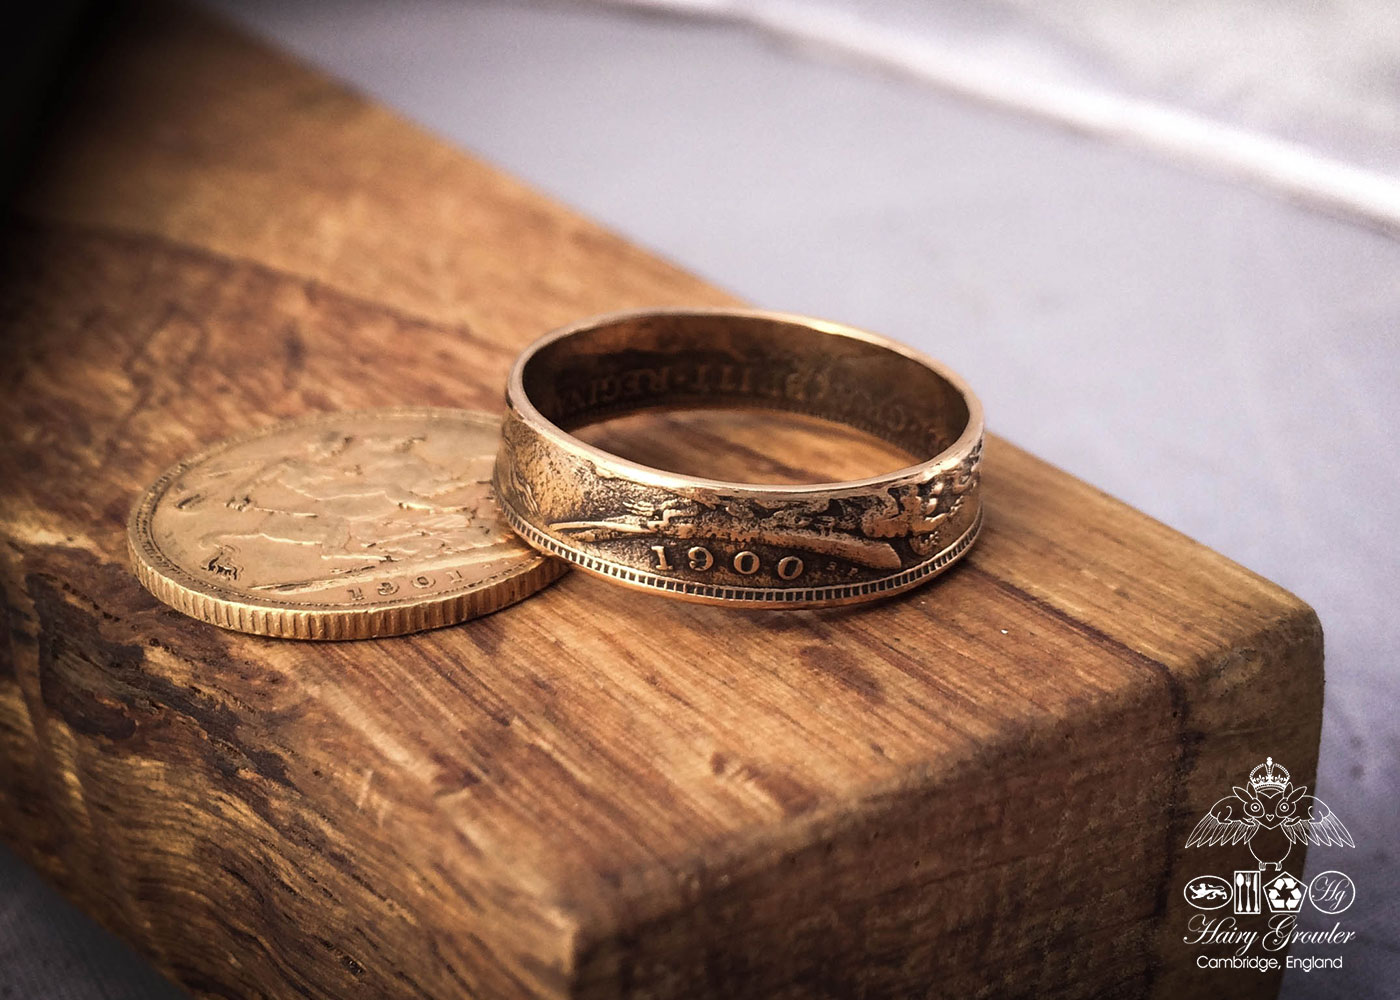 Handcrafted and recycled 22ct gold coin wedding rings